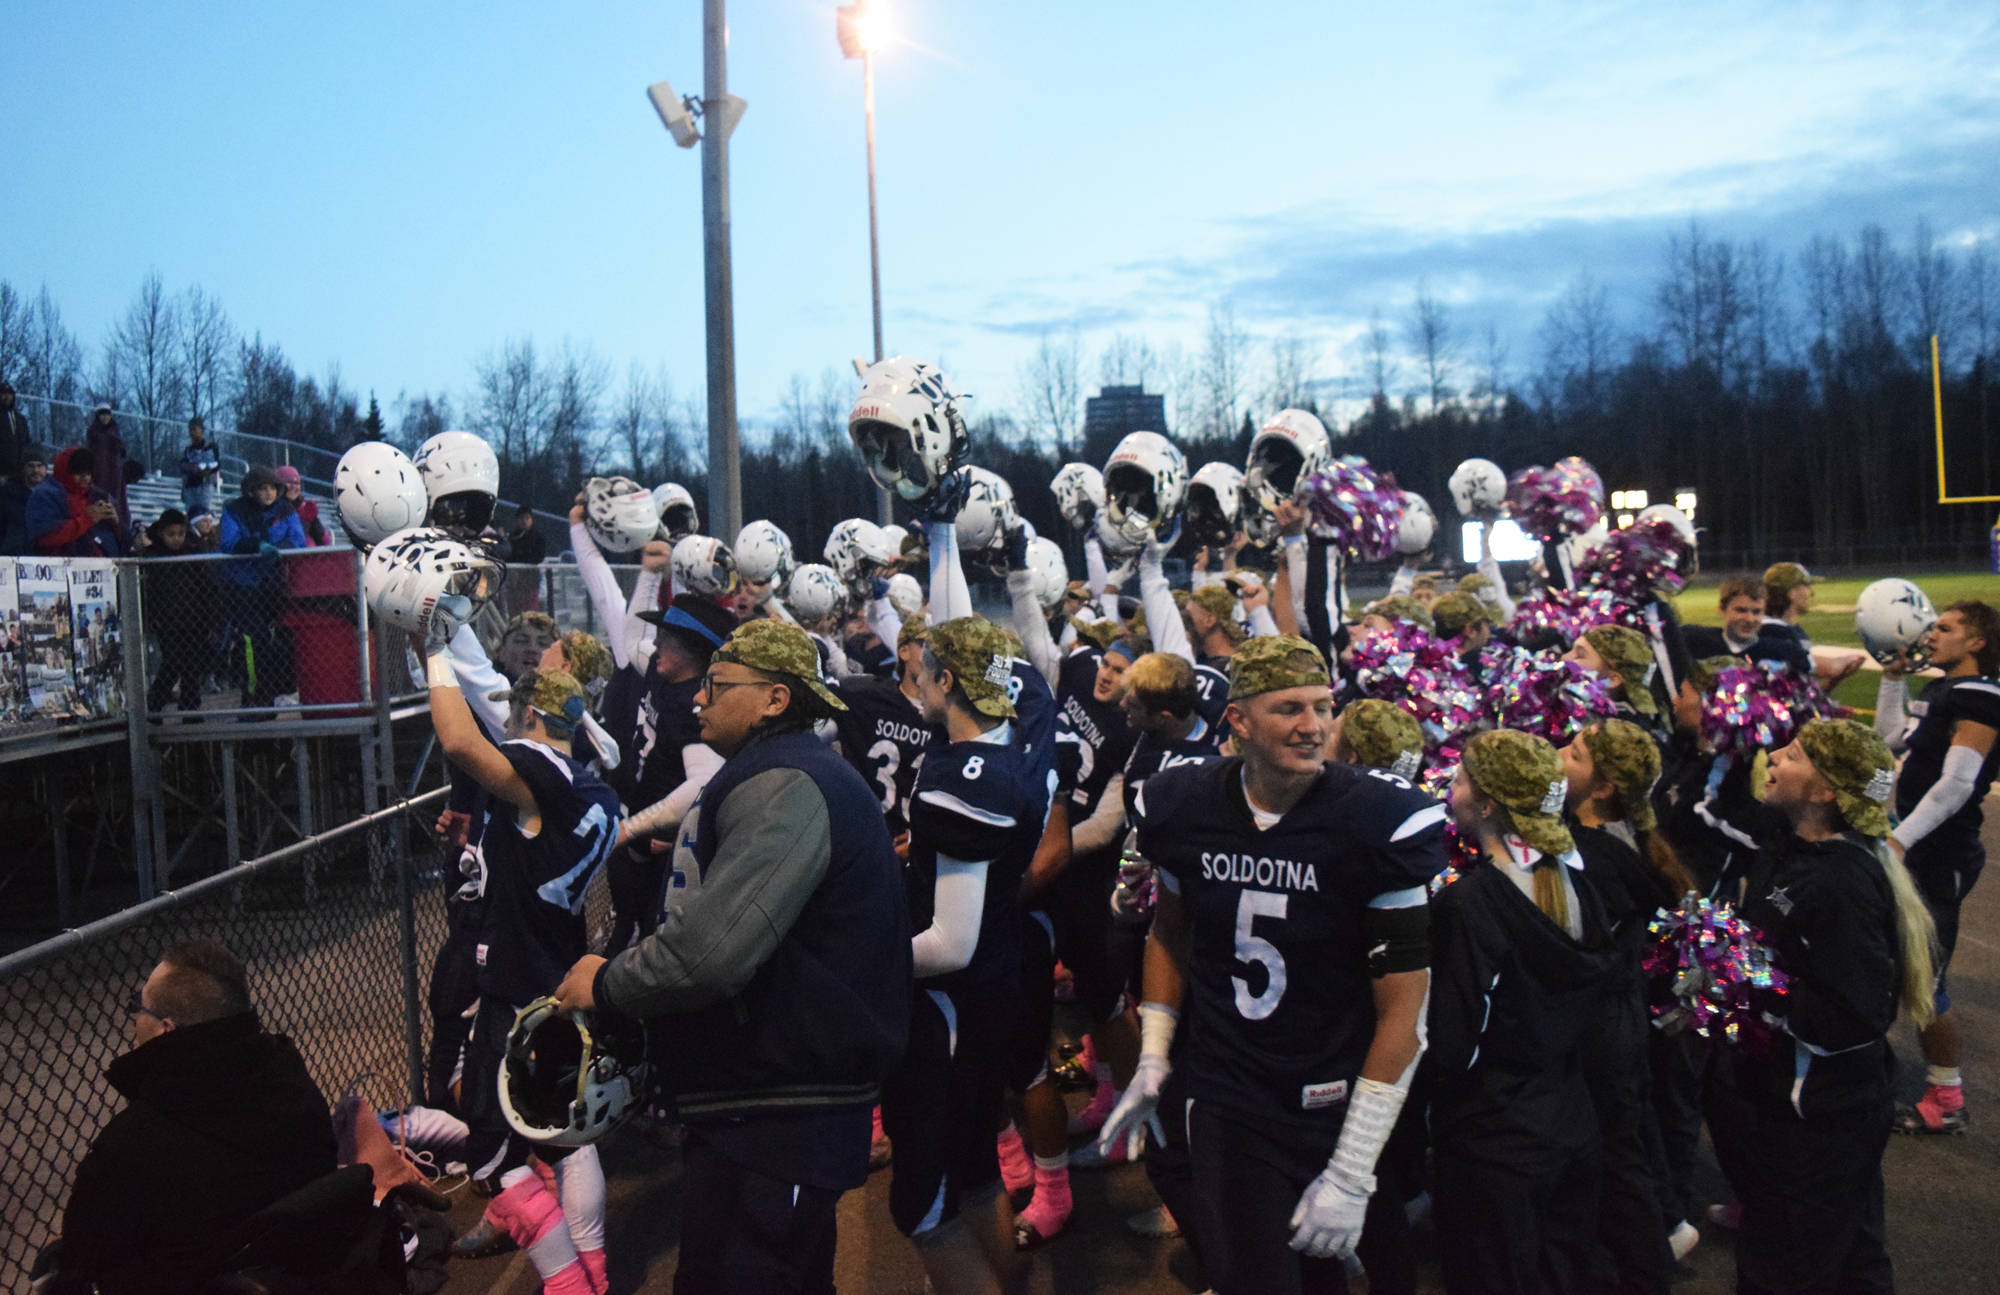 The Soldotna football team celebrates the victory over Lathrop, Saturday, Oct. 19, 2019, at the Div. II state football championship at Anchorage Football Stadium in Anchorage, Alaska. (Photo by Joey Klecka/Peninsula Clarion)